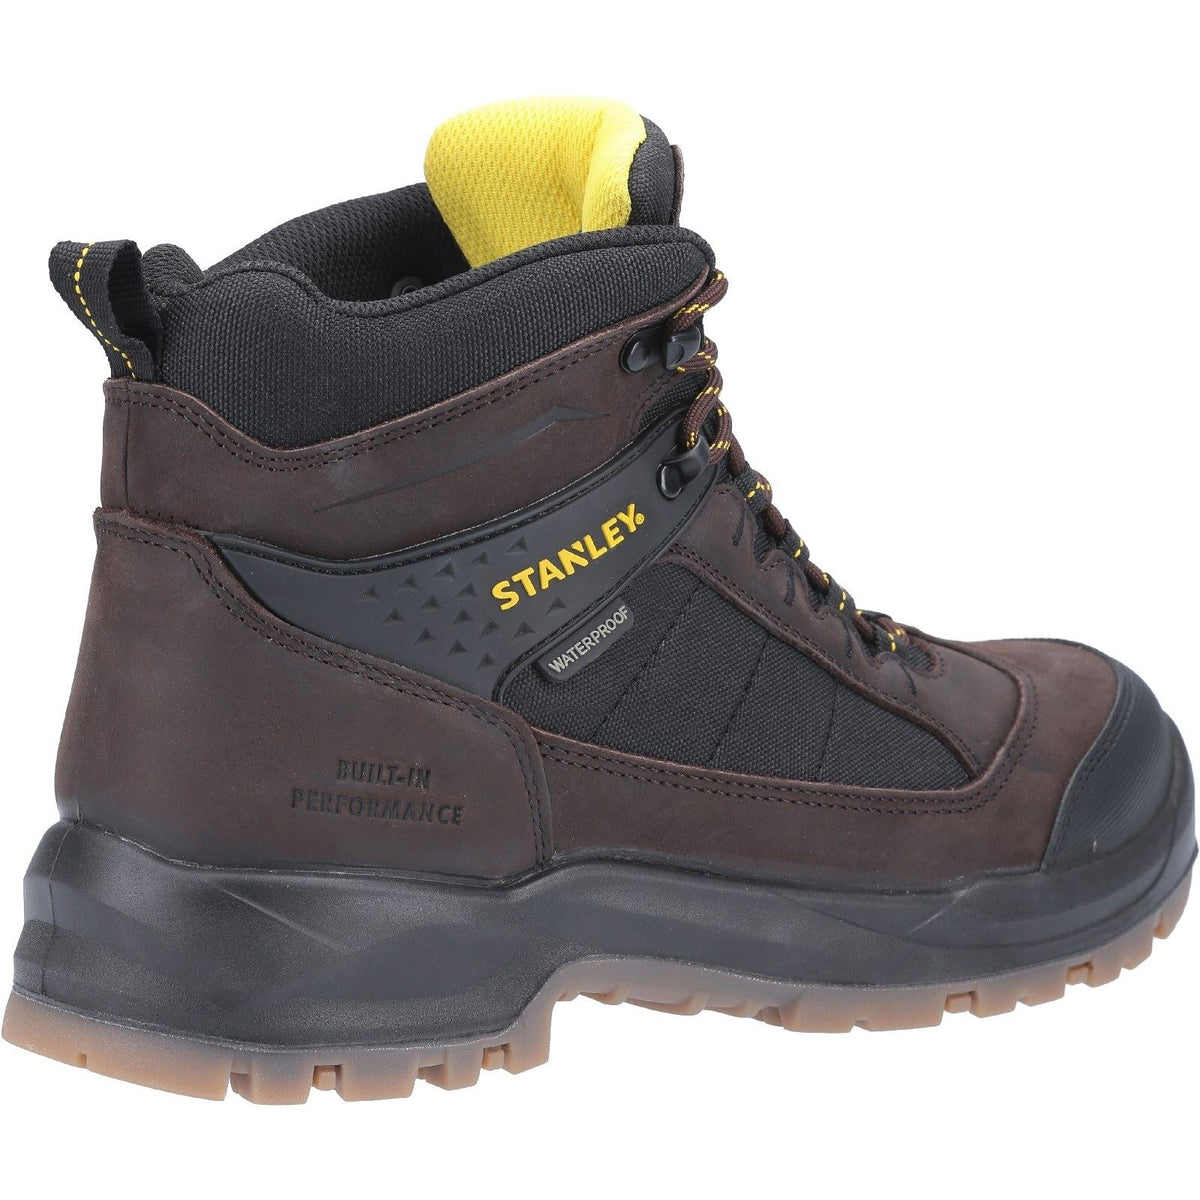 Stanley Berkeley Full Safety Boots